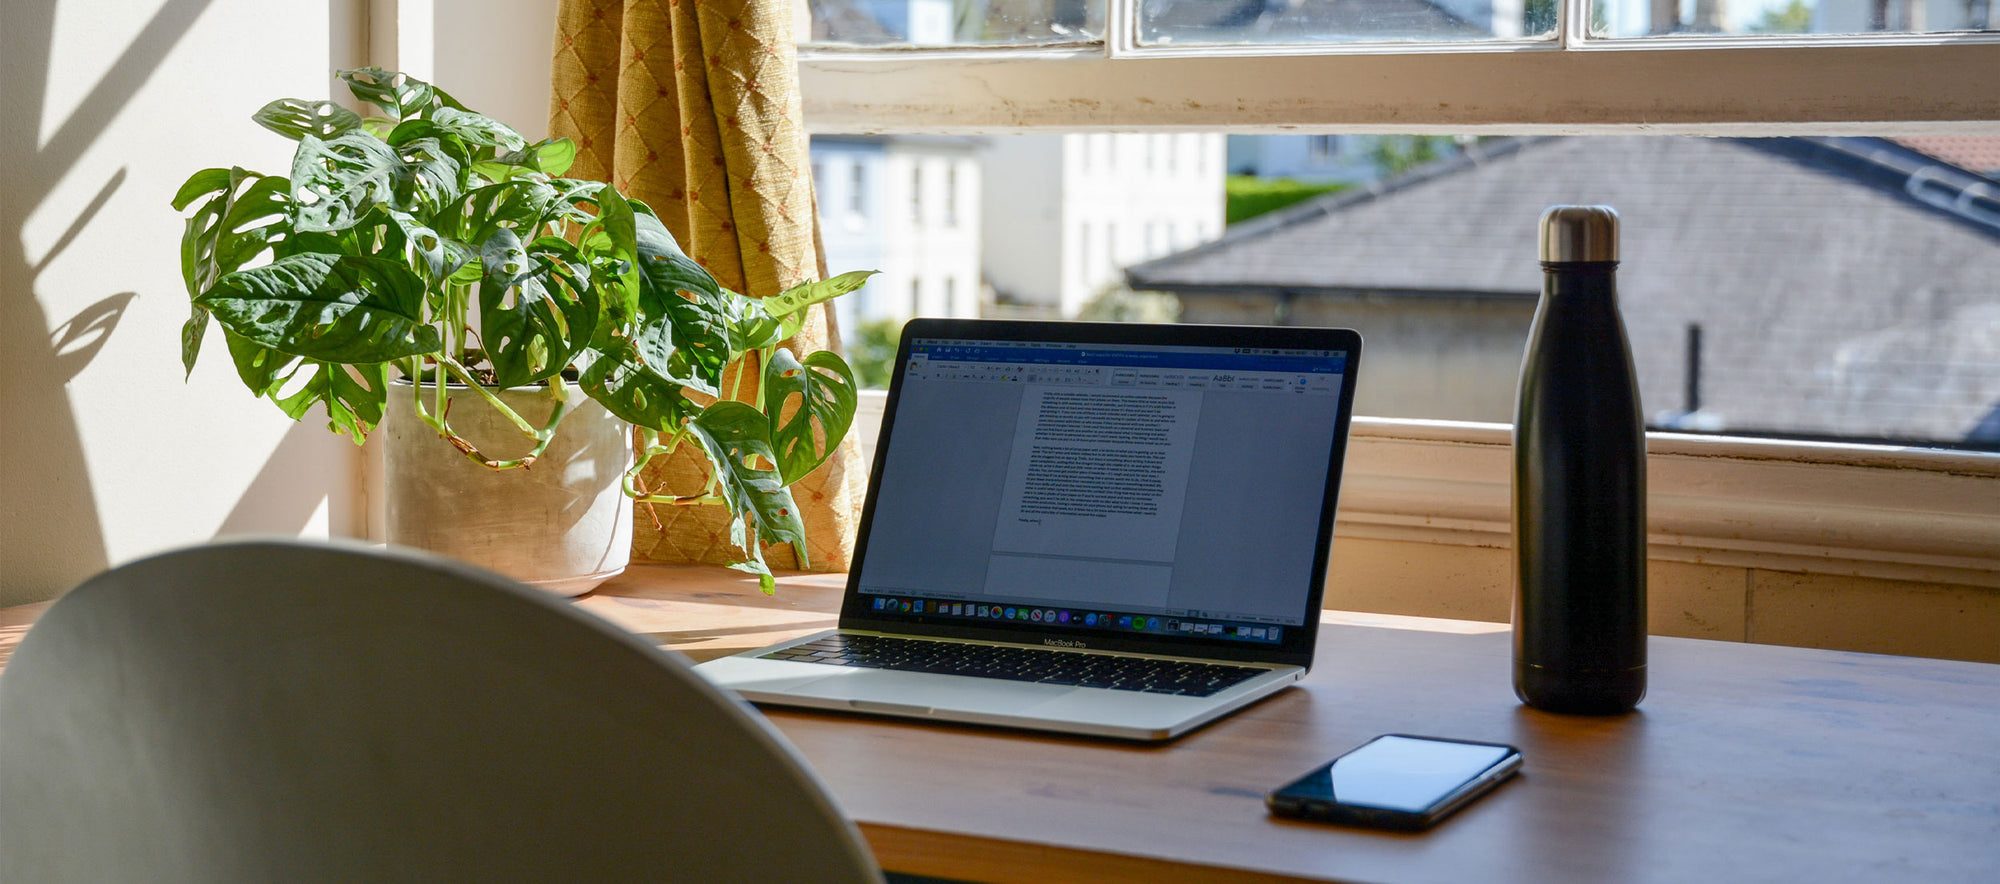 Working from Home – Simple Tips to Improve Your Home Office